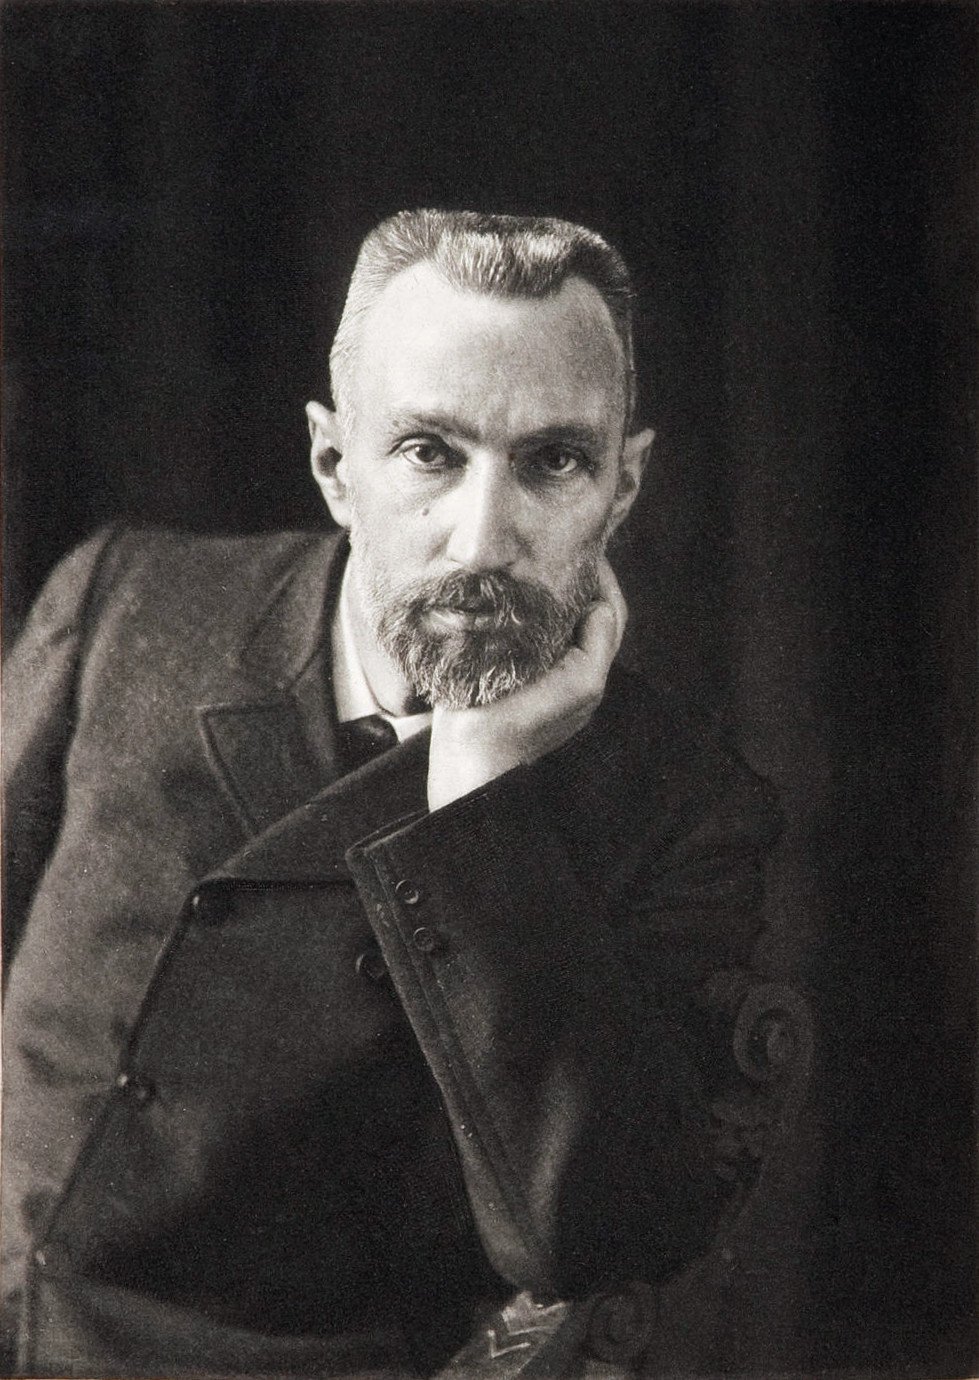 A picture of Pierre Curie taken by Dujardin in 1906, Marie Curie's husband, Nobel Prize winner - HeadStuff.org